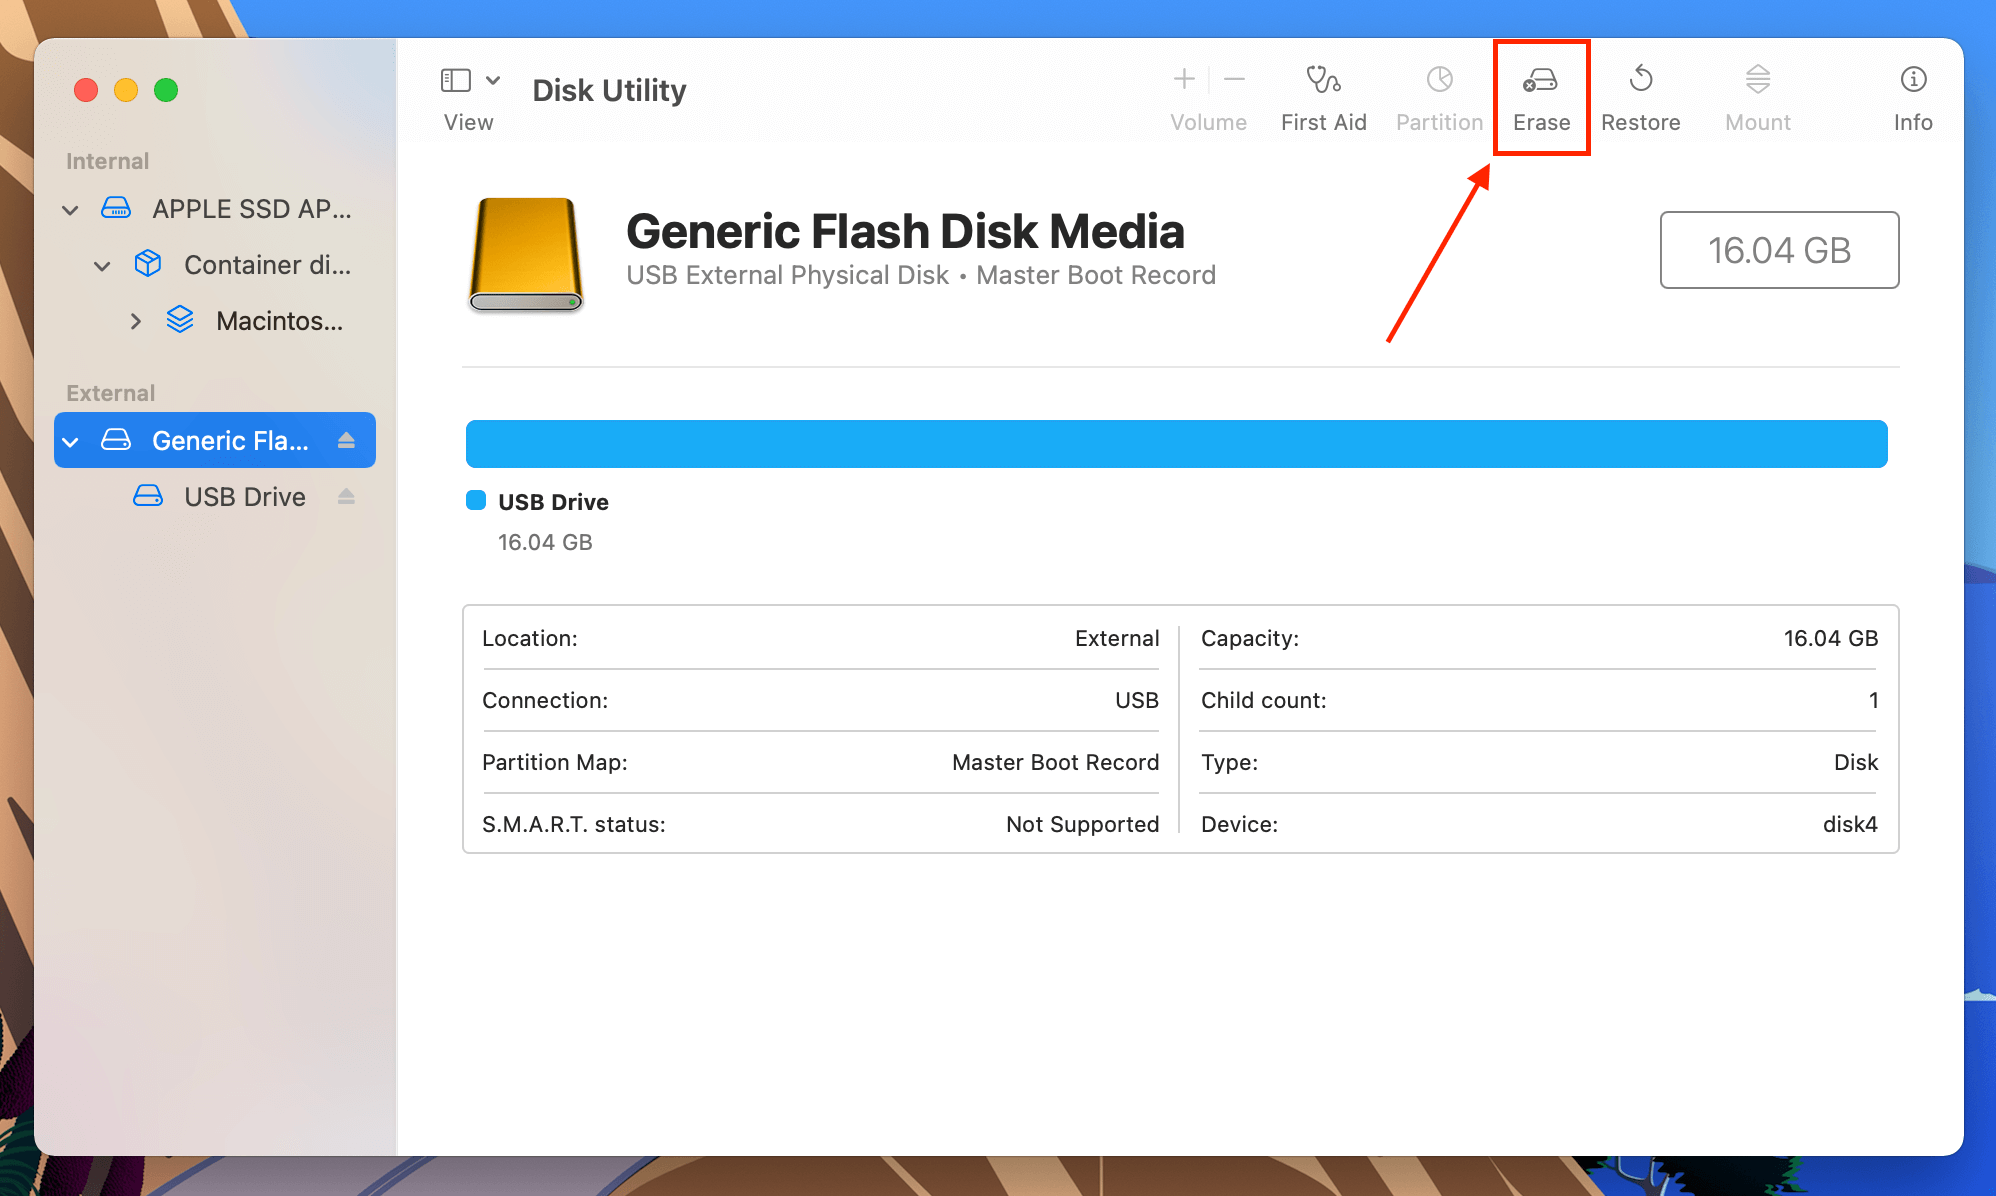 Erase button in the Disk Utility window